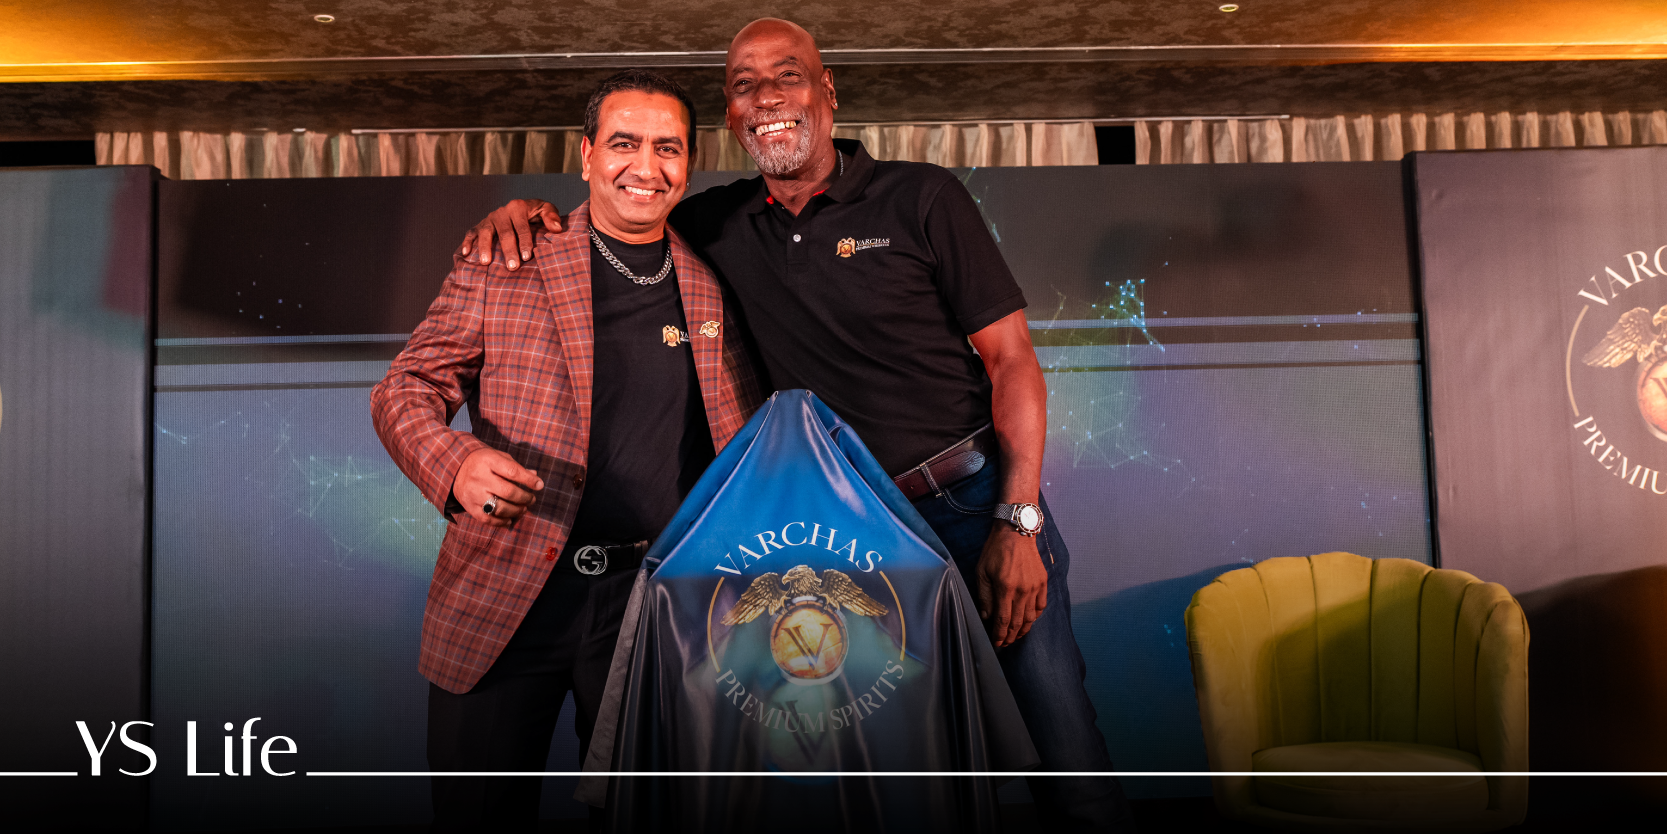 With cricket legend Viv Richards as its brand ambassador, Varchas Whiskey makes India debut 